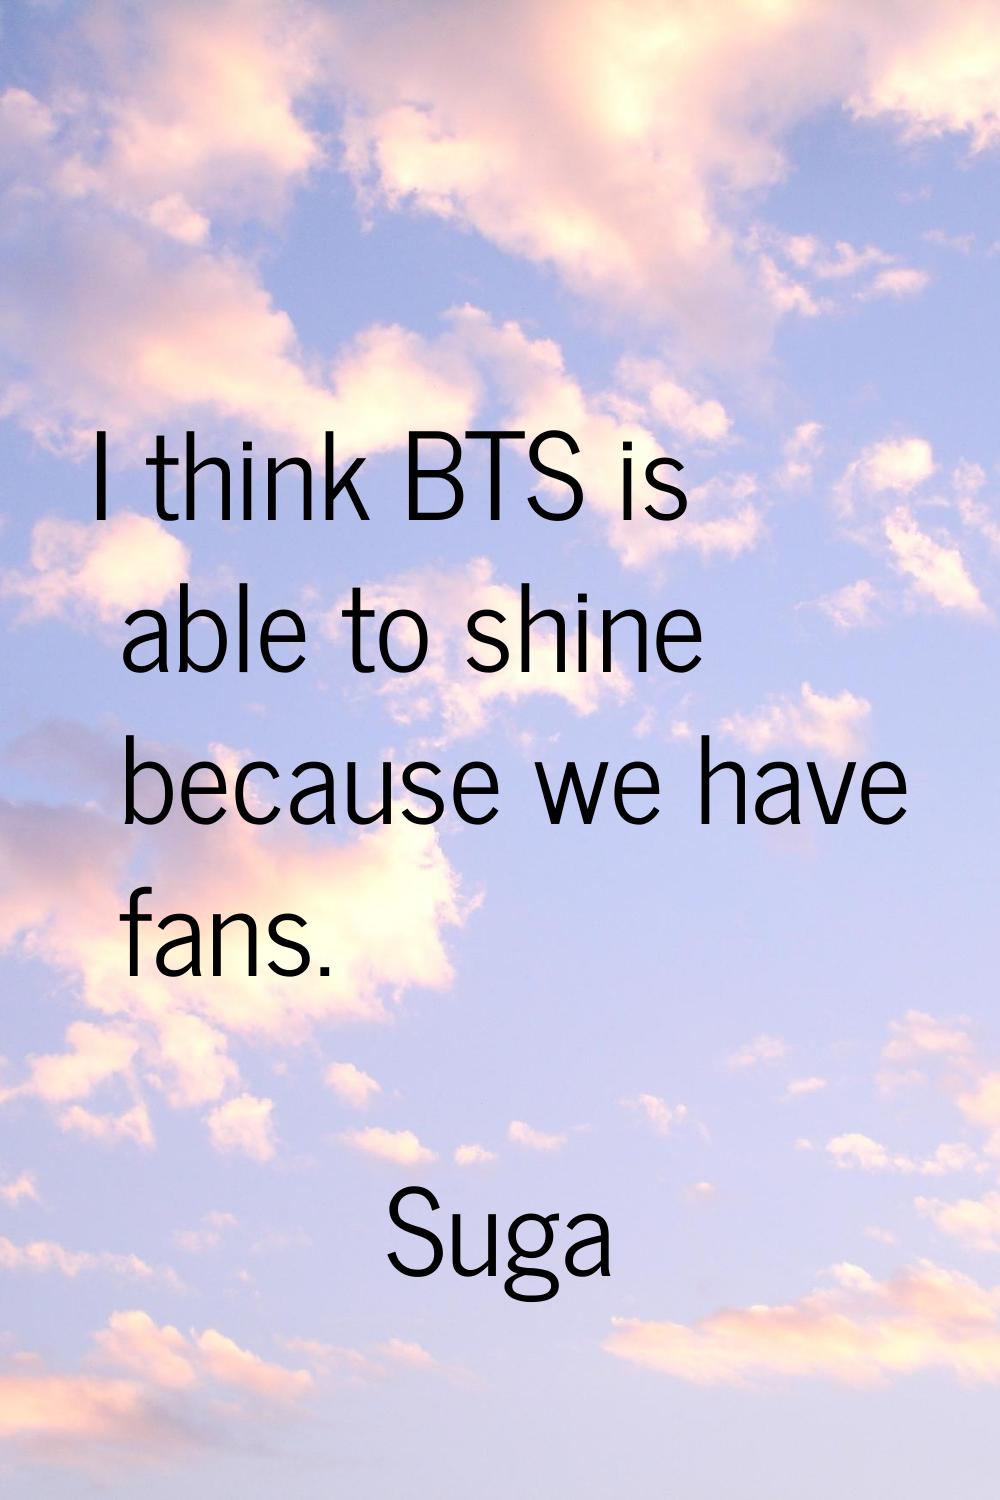 I think BTS is able to shine because we have fans.